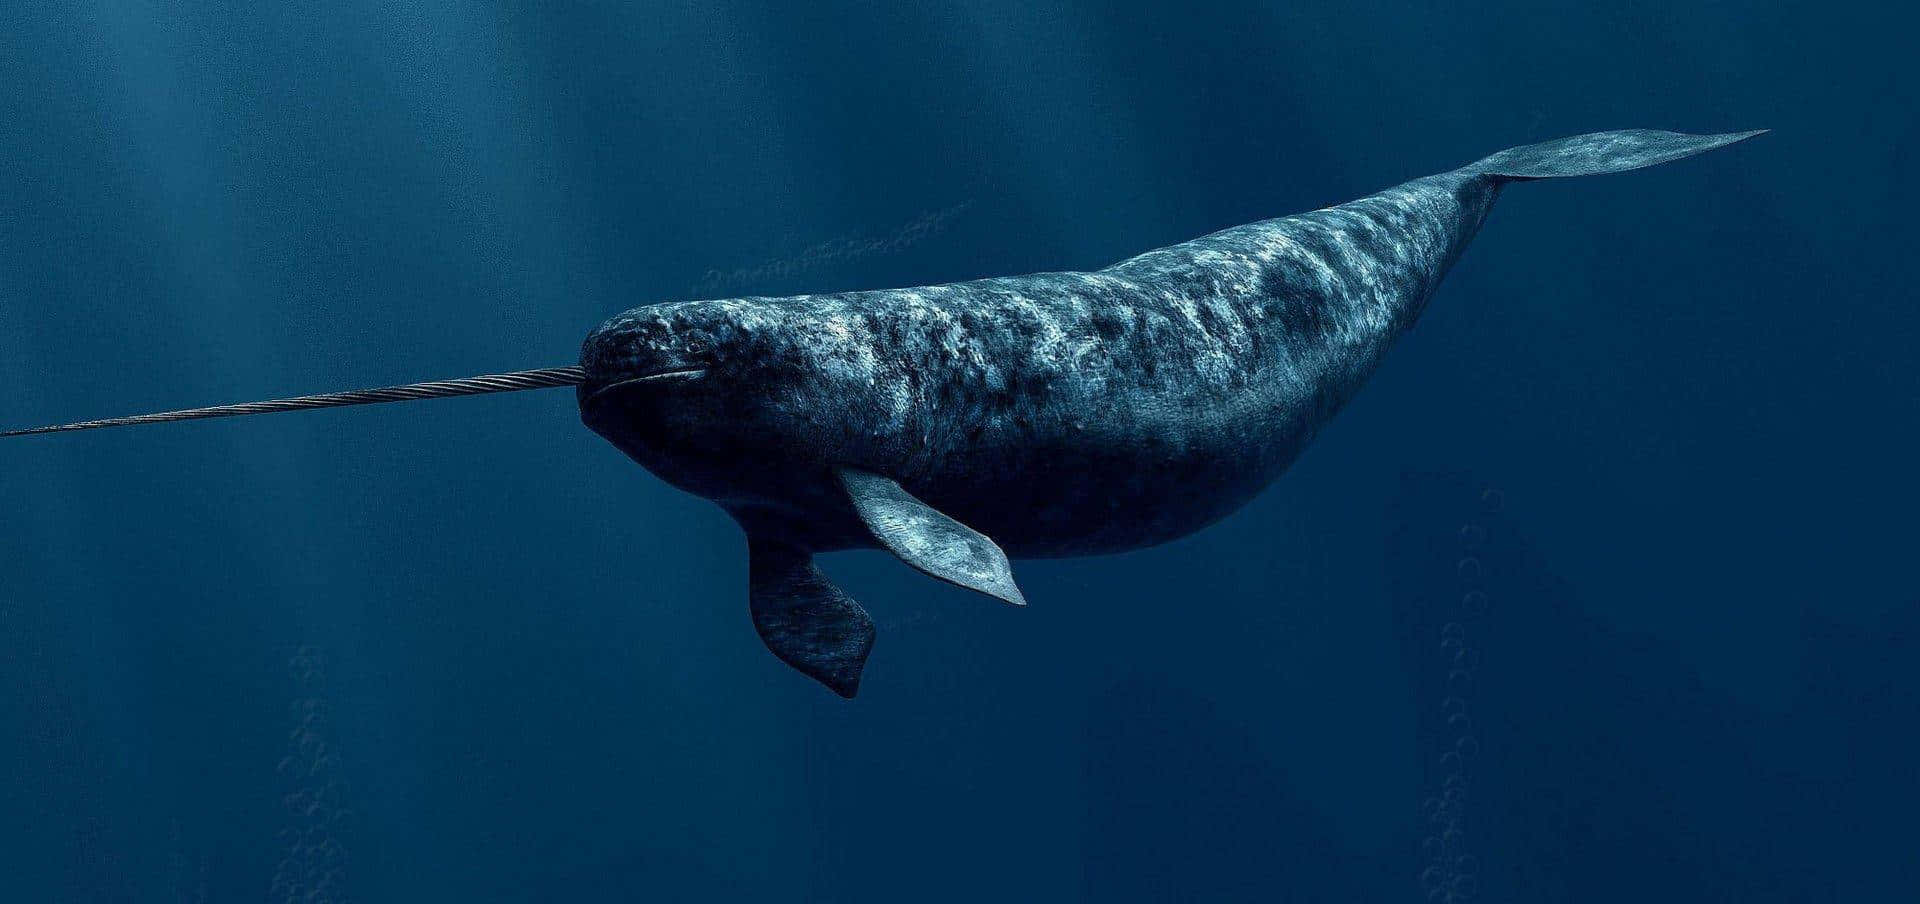 Majestic Narwhal at Play in Arctic Ocean